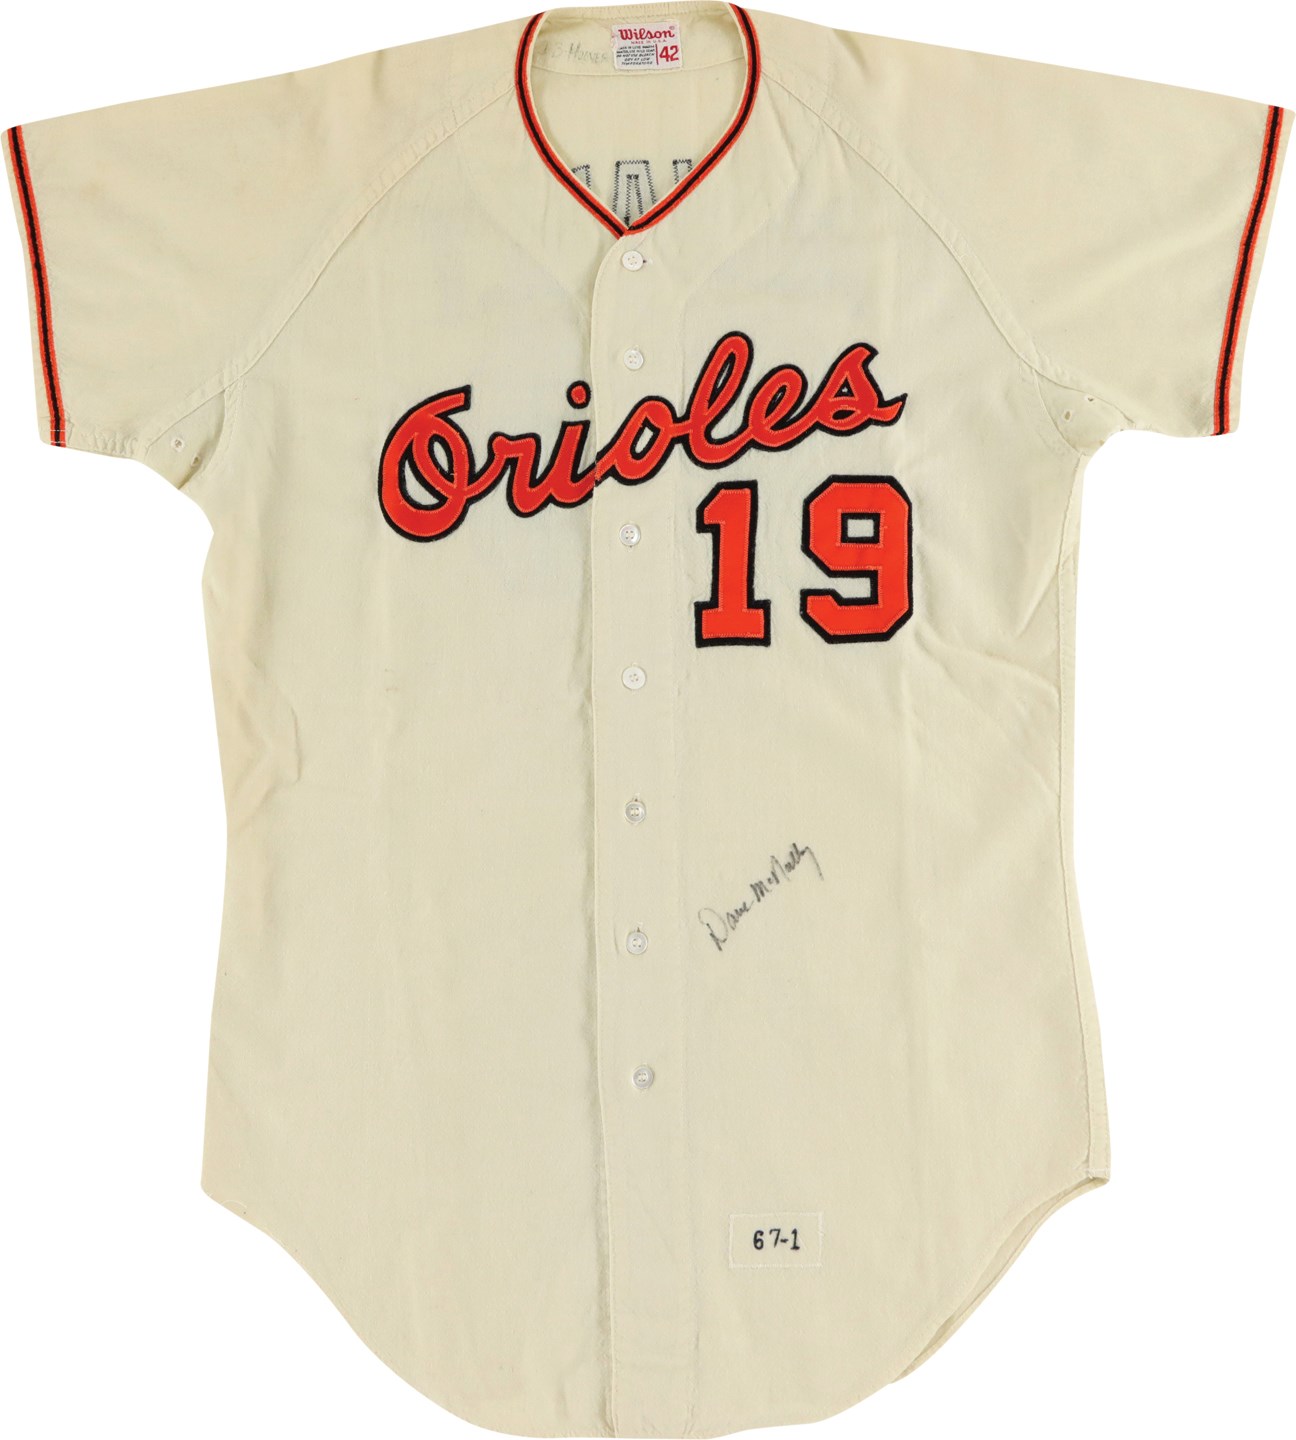 Baseball Equipment - 1967 Dave McNally Baltimore Orioles Signed Game Worn Jersey